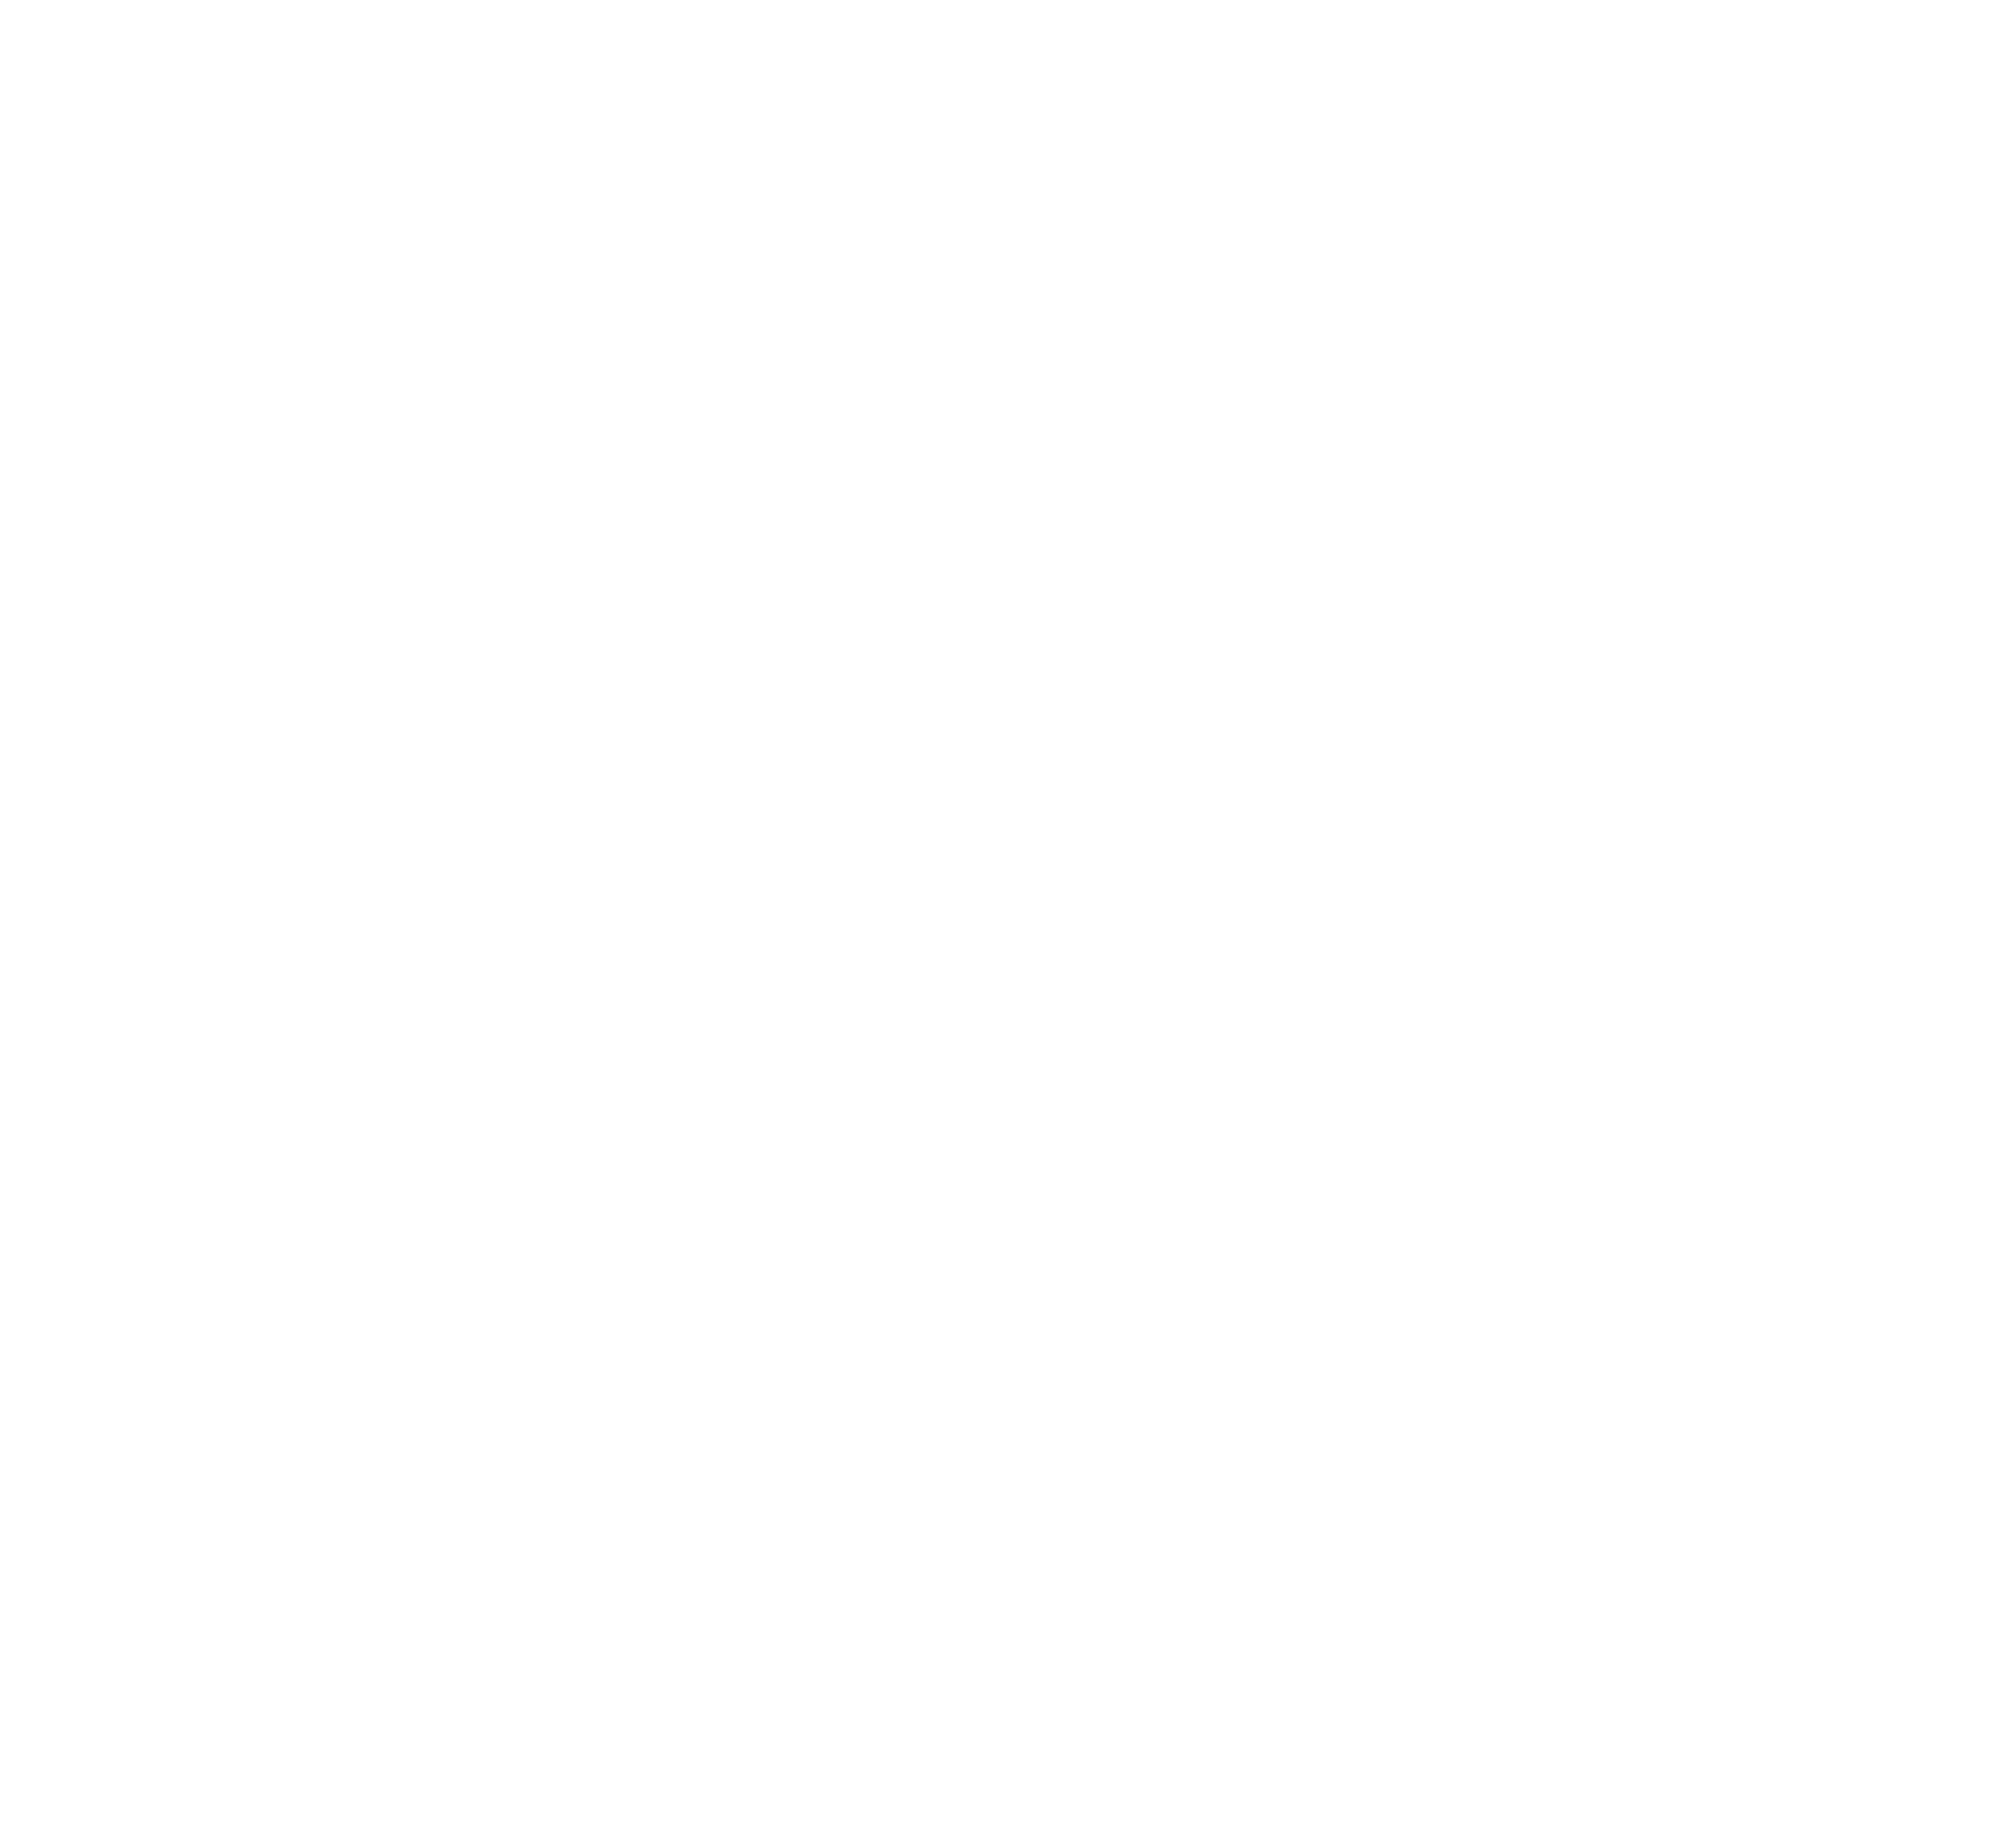 live chat icon